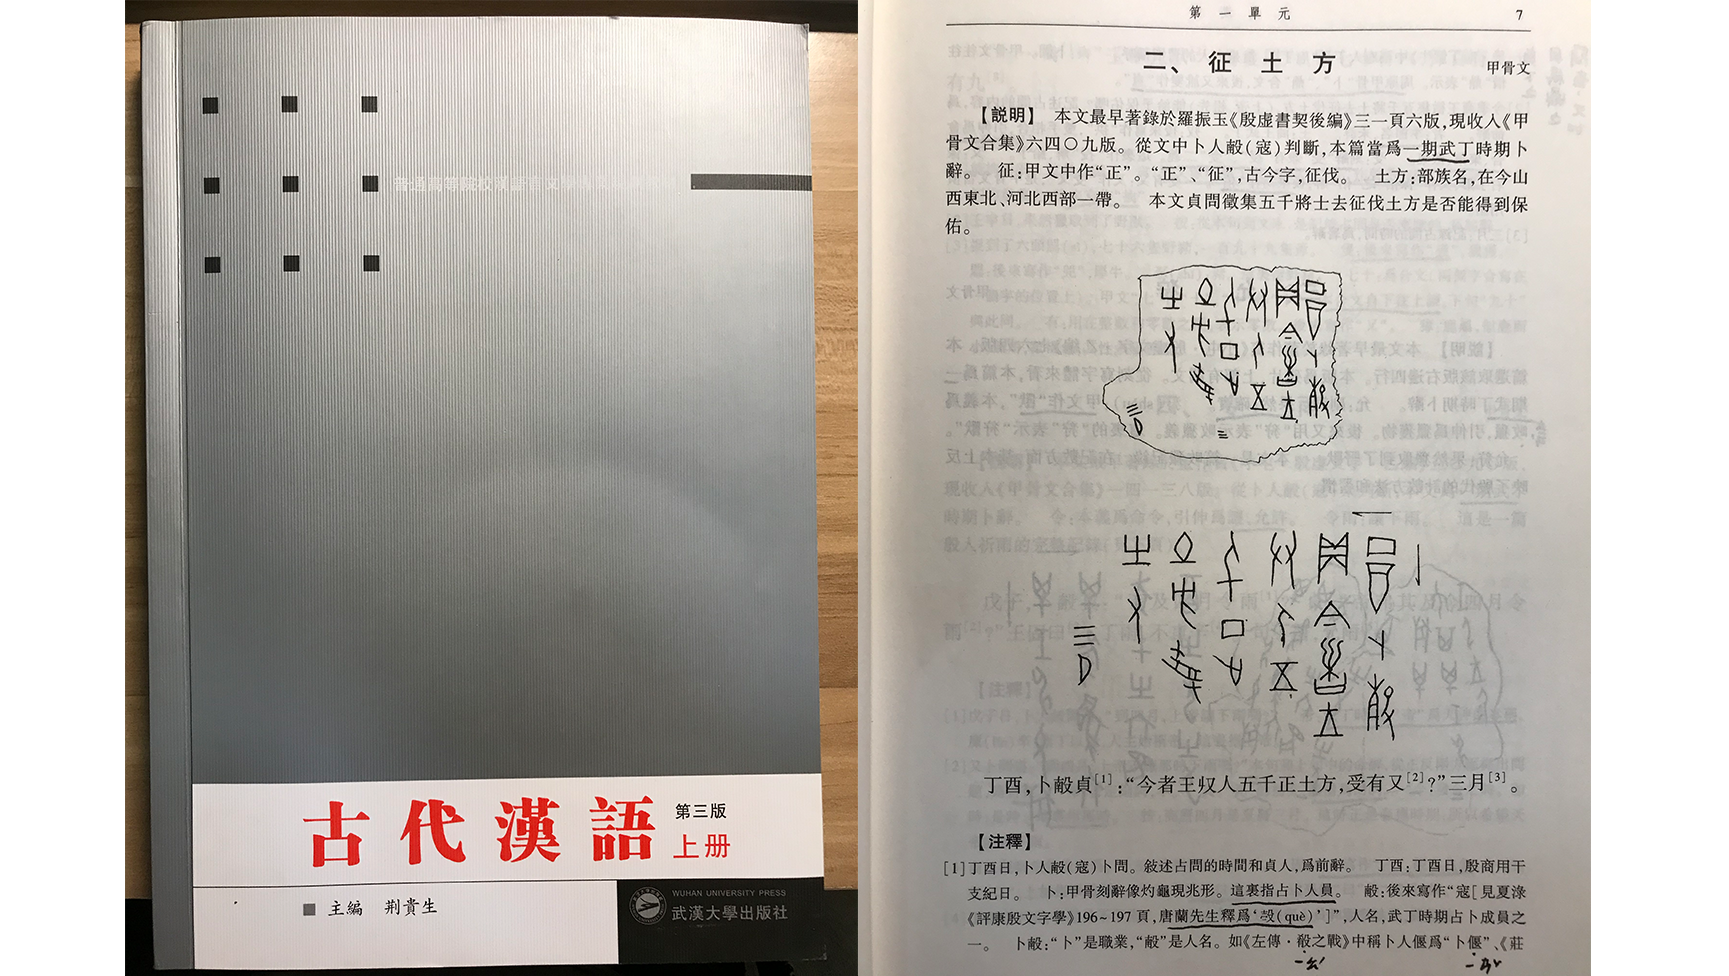 Jing Guisheng's Ancient Chinese textbook